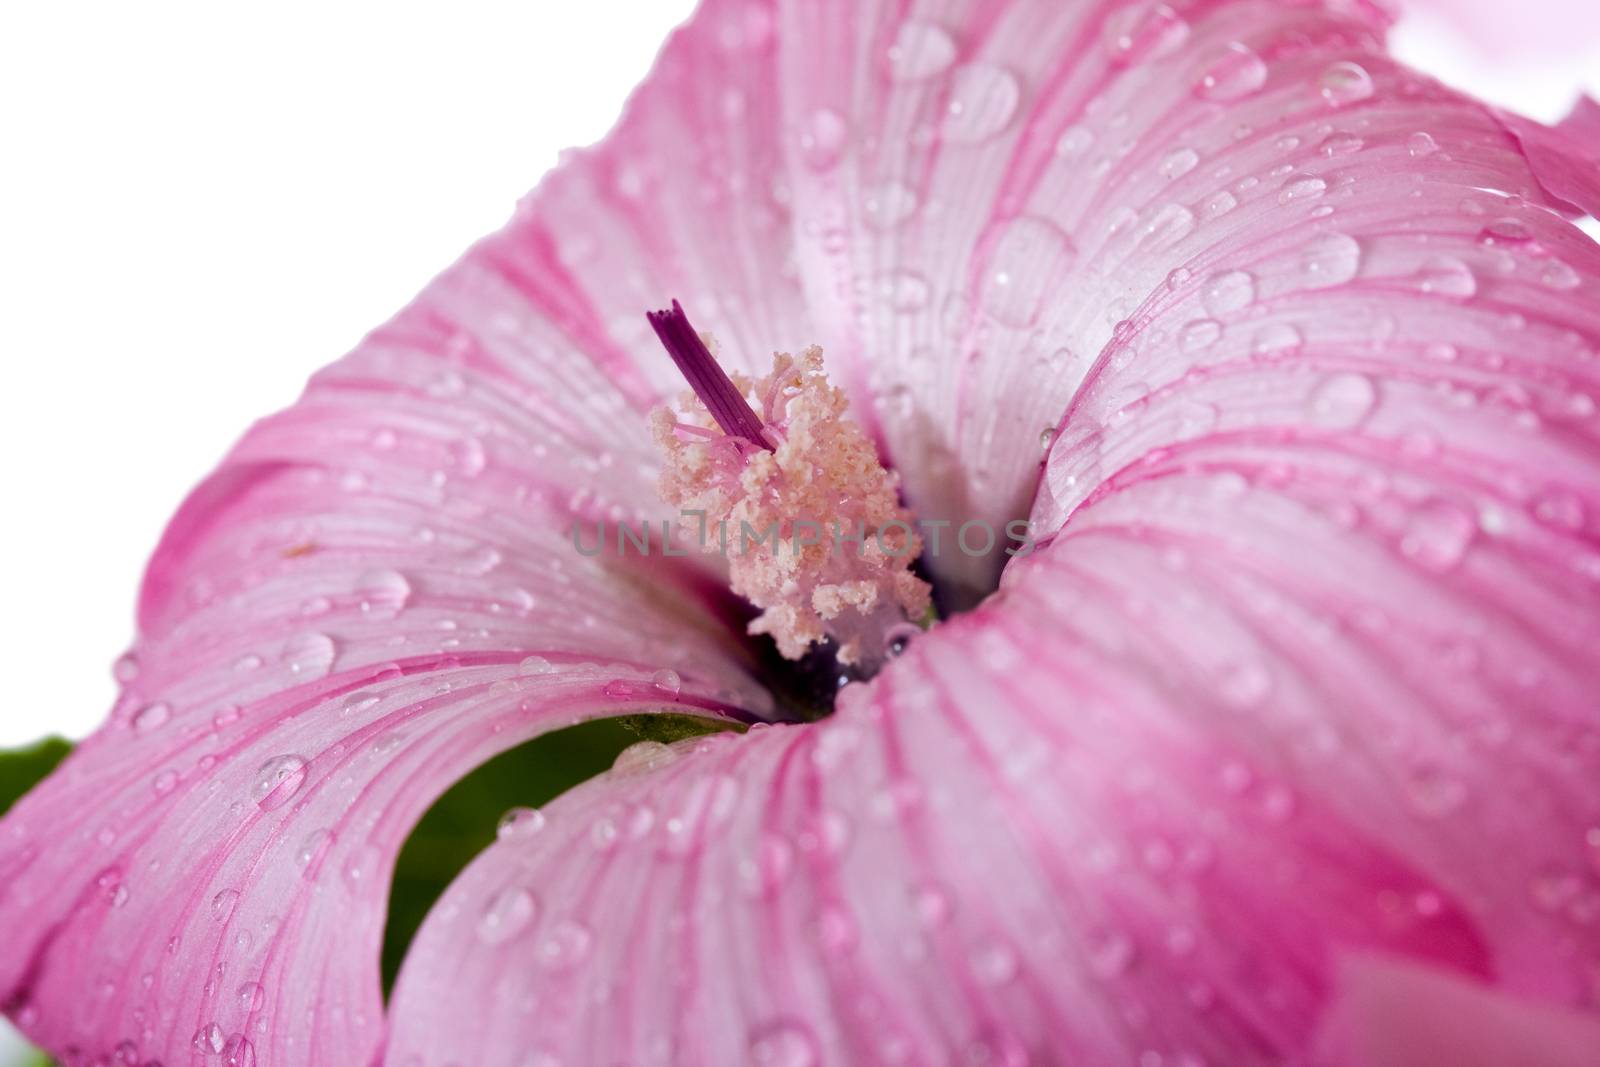 Macro of a flower with visible water drops. Flower placed against a white background.